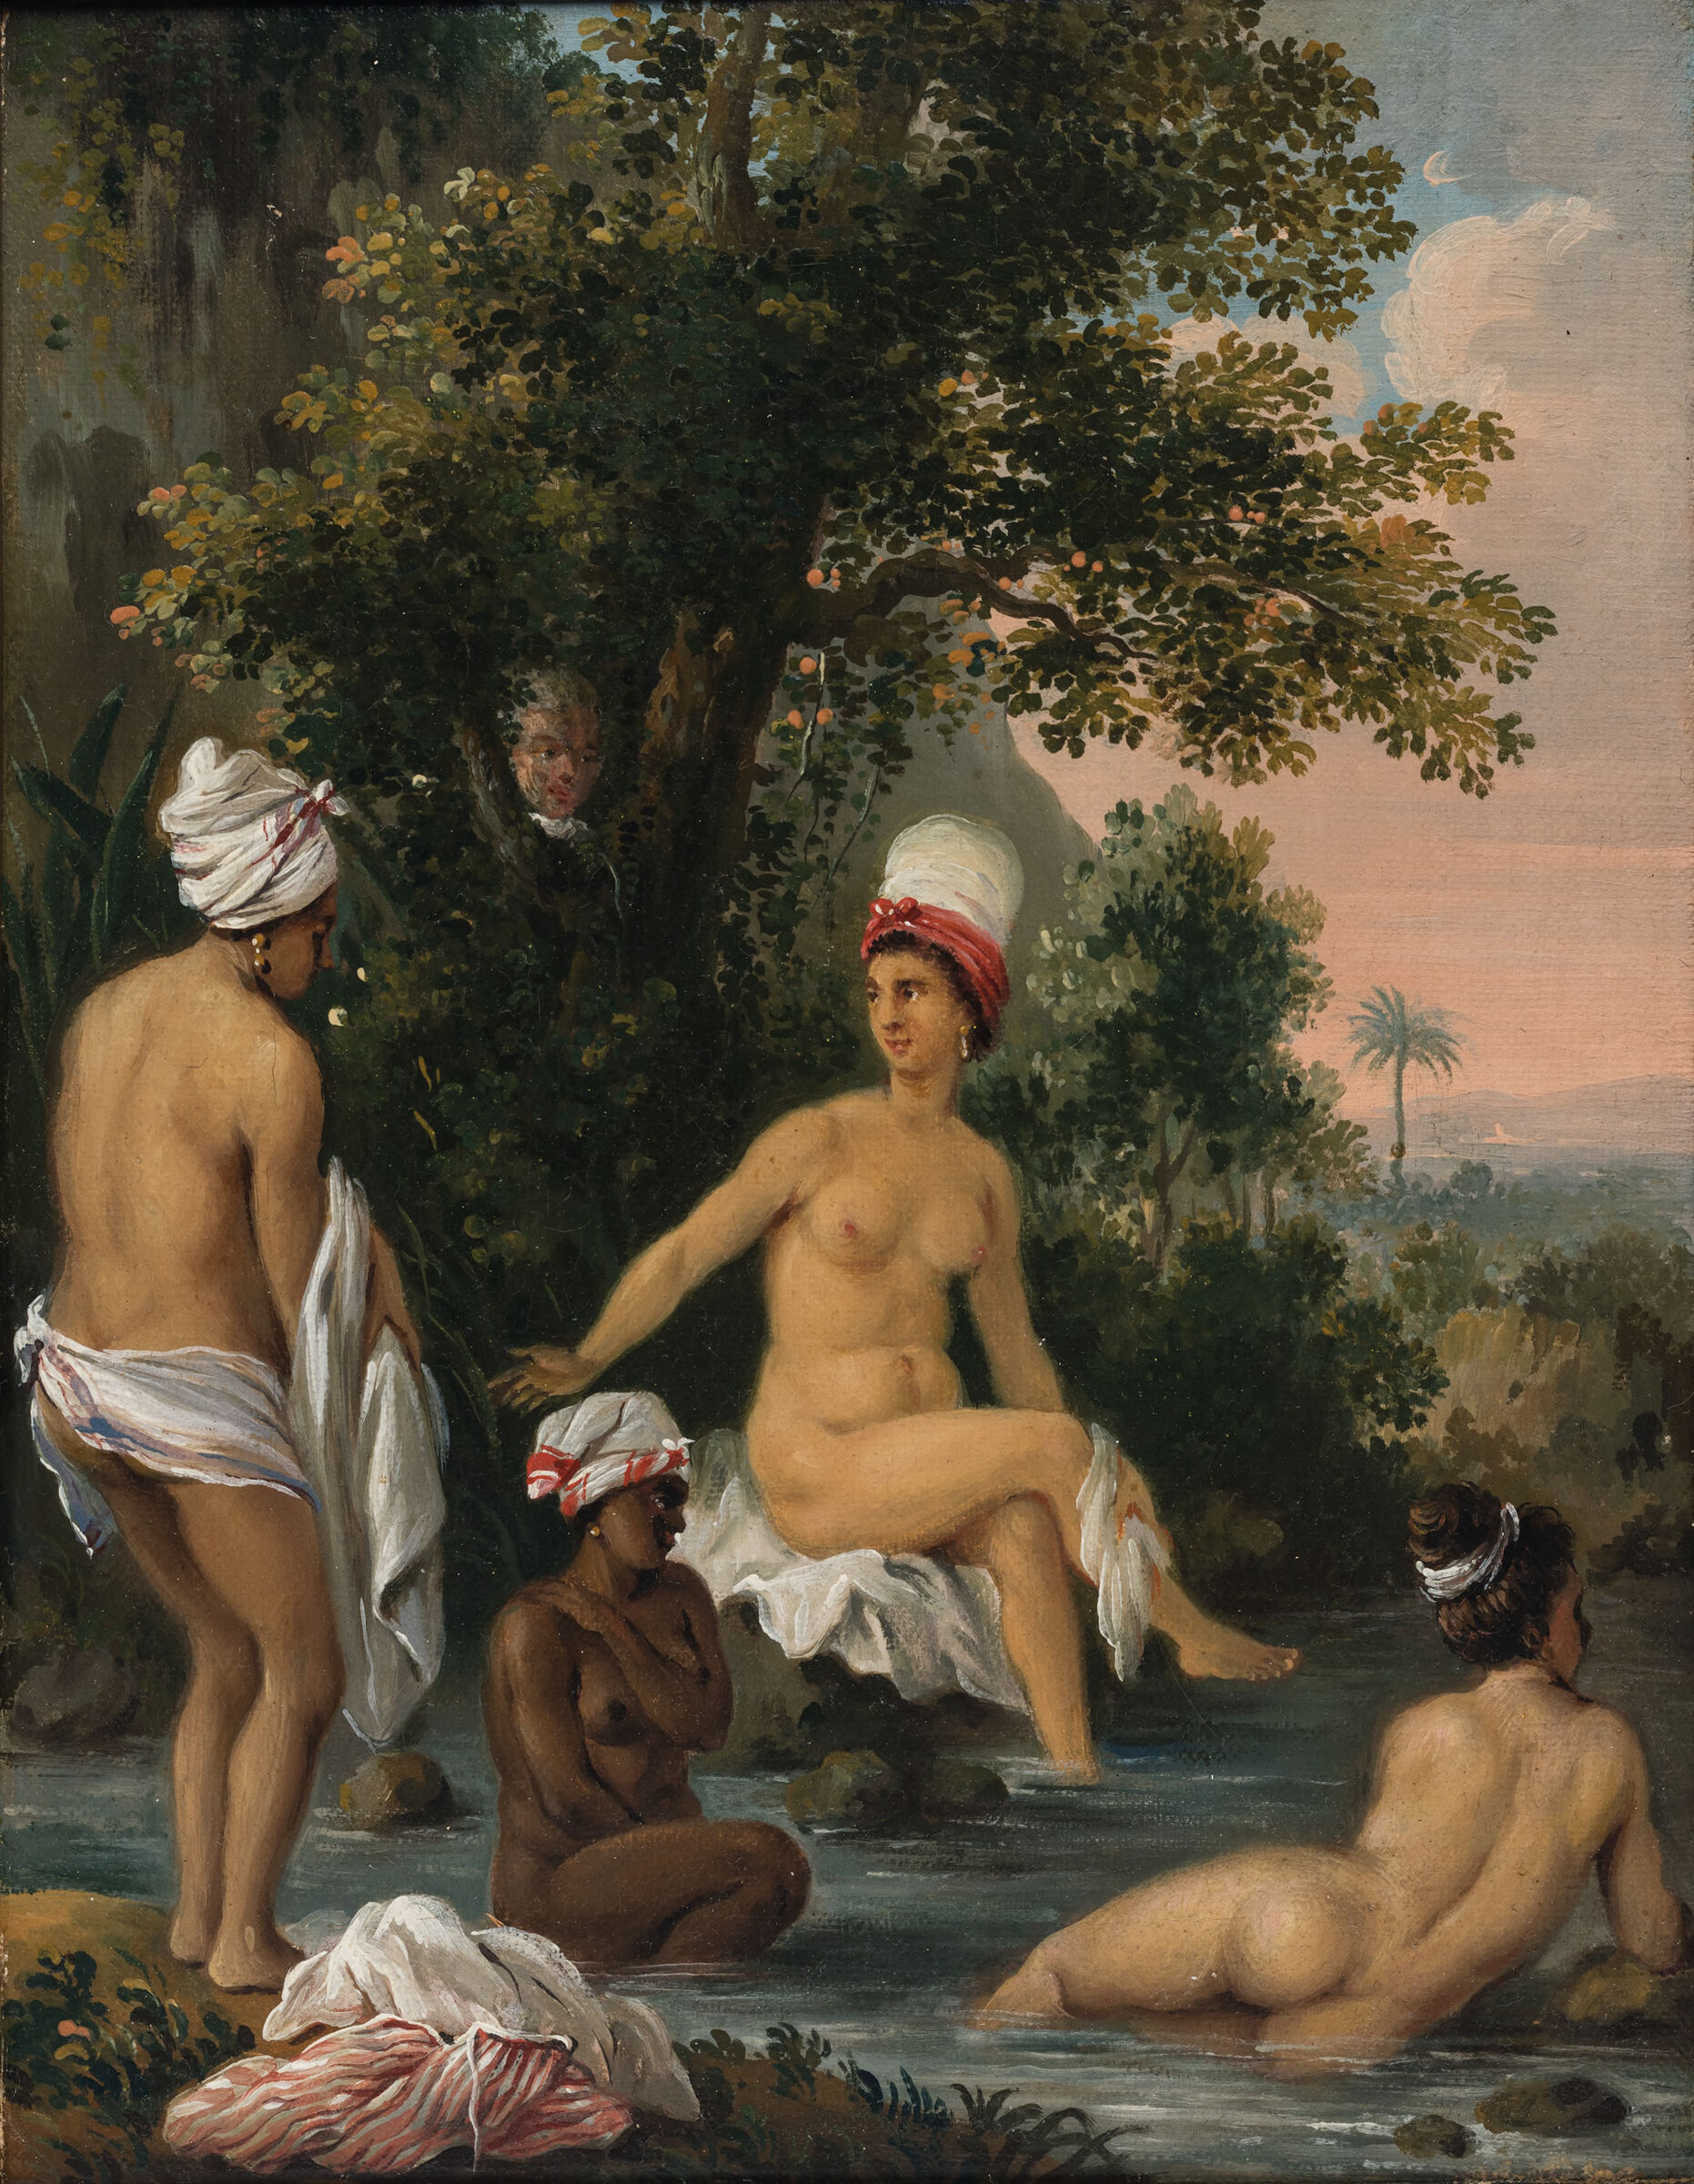 Women Of Color Bathing And A Voyeur [Mulatresses And Negro Woman Bathing]